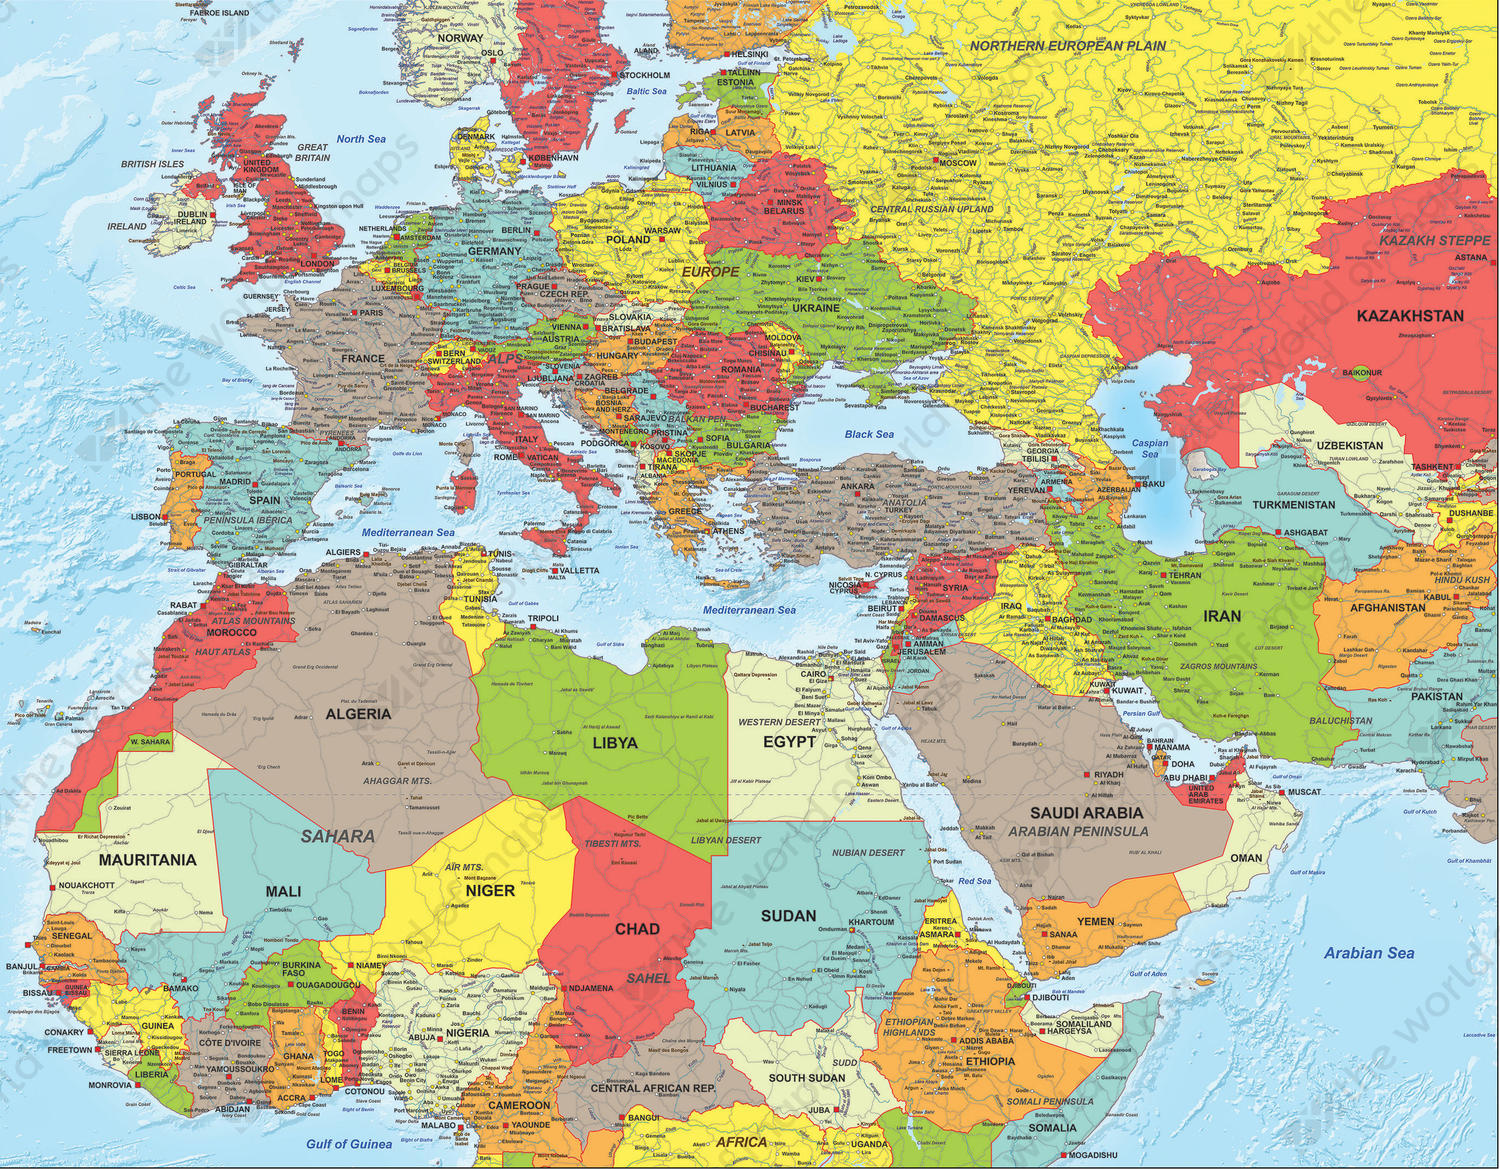 Map Of Europe Middle East And North Africa_ | United States Map